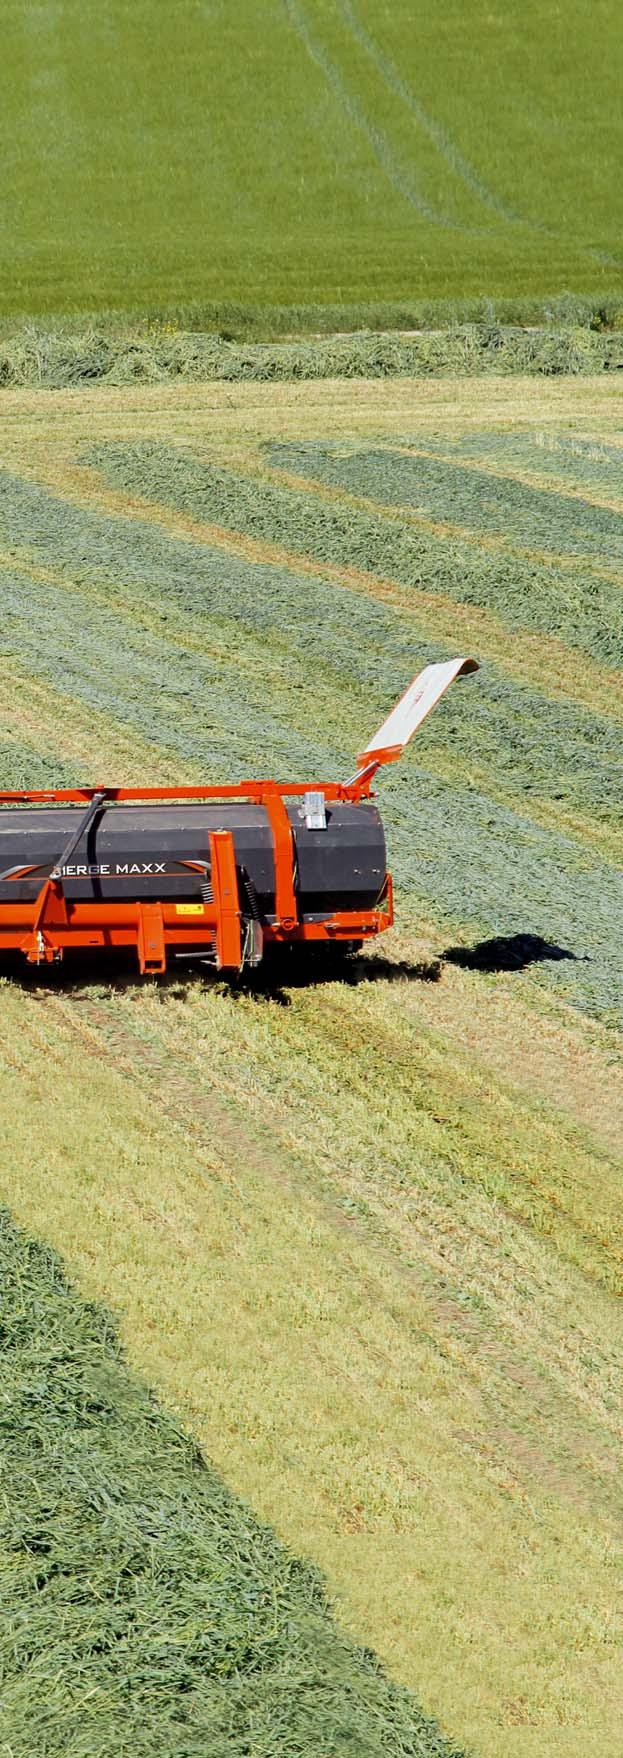 MERGE MAXX 950 A DIFFERENT WAY OF WINDROWING The MERGE MAXX 950 is a highly versatile machine.